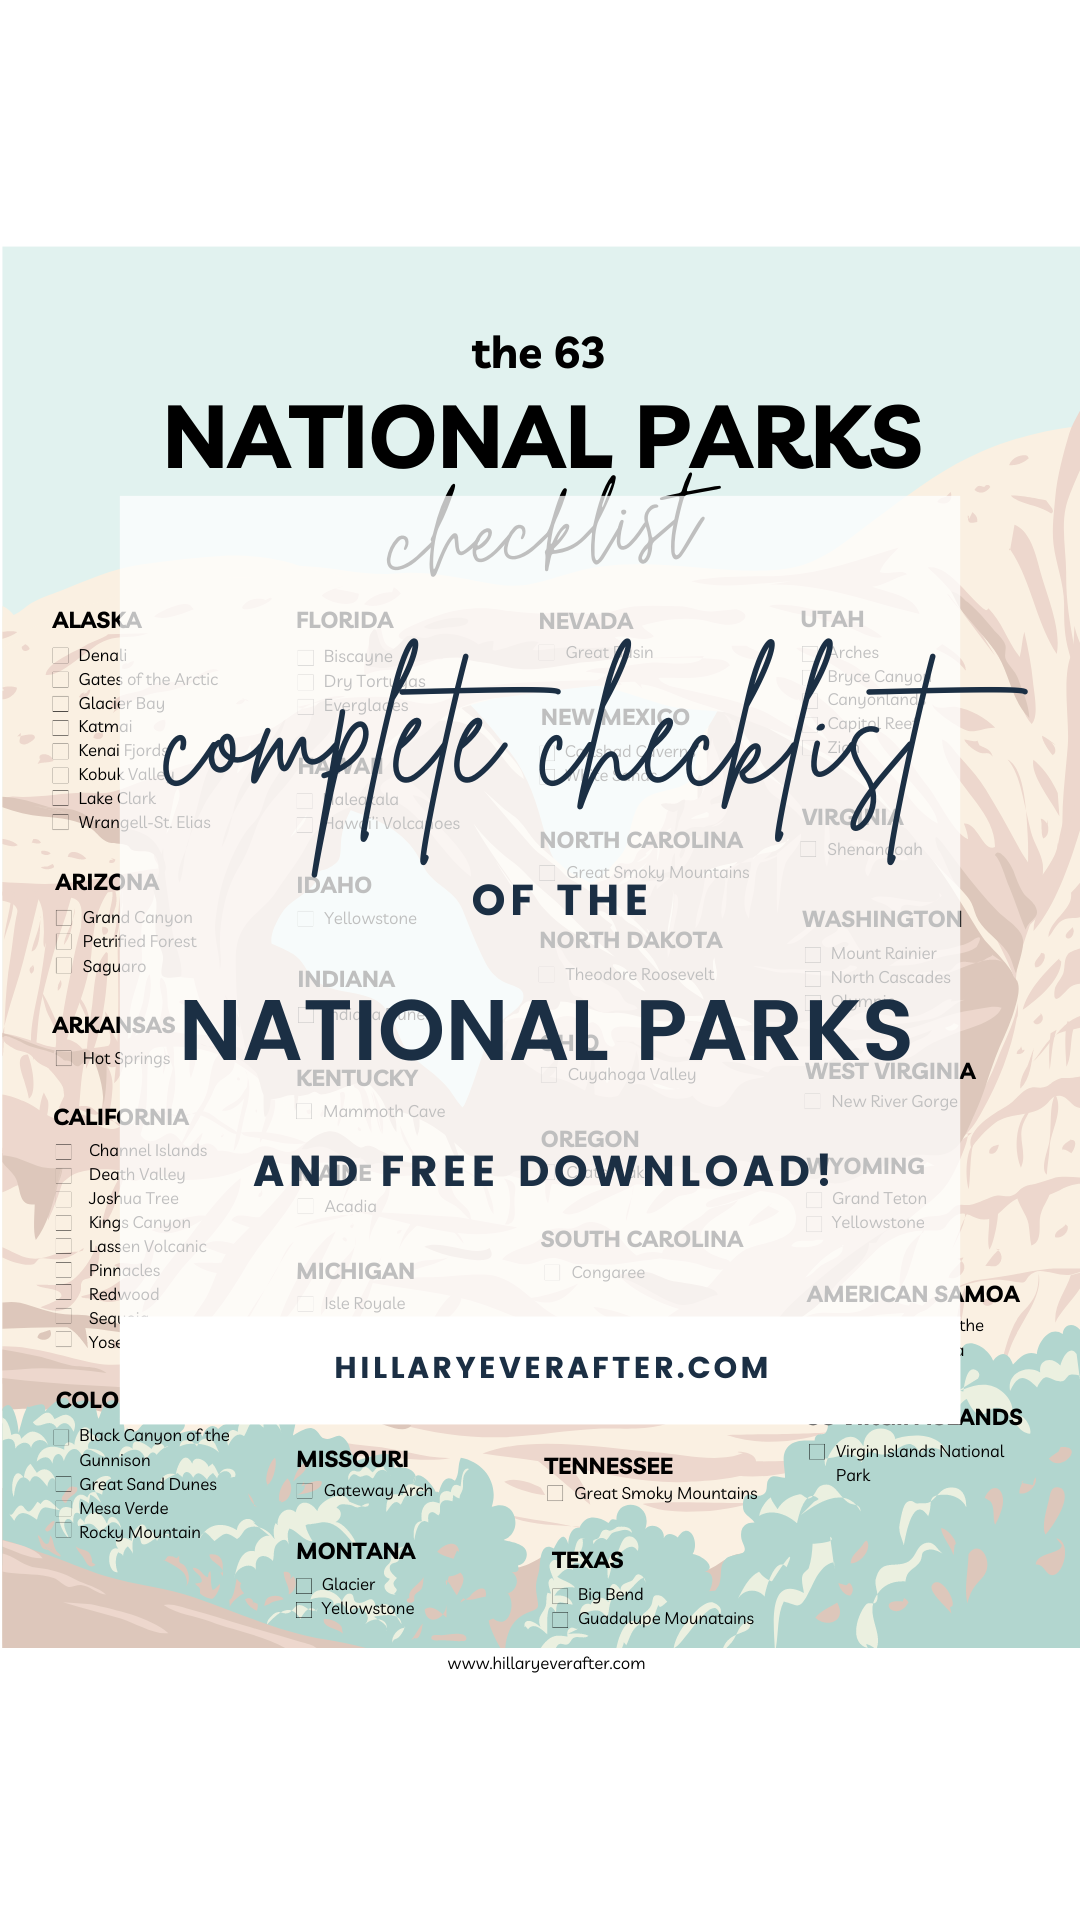 complete checklist of the National Parks